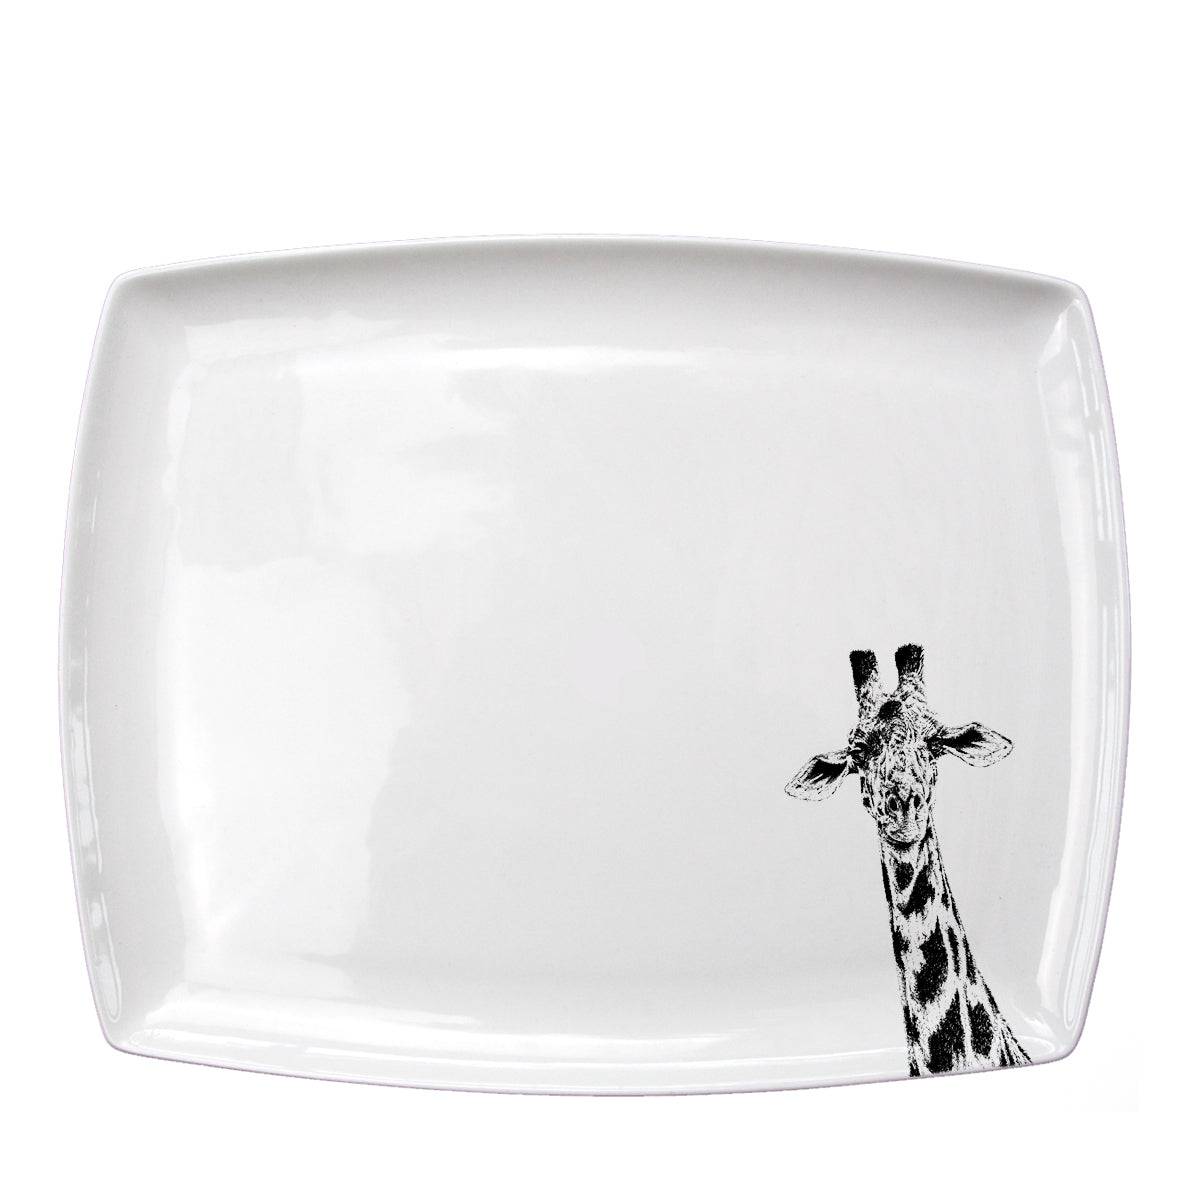 Giraffe Platter - Large for sale - Woodcock and Cavendish